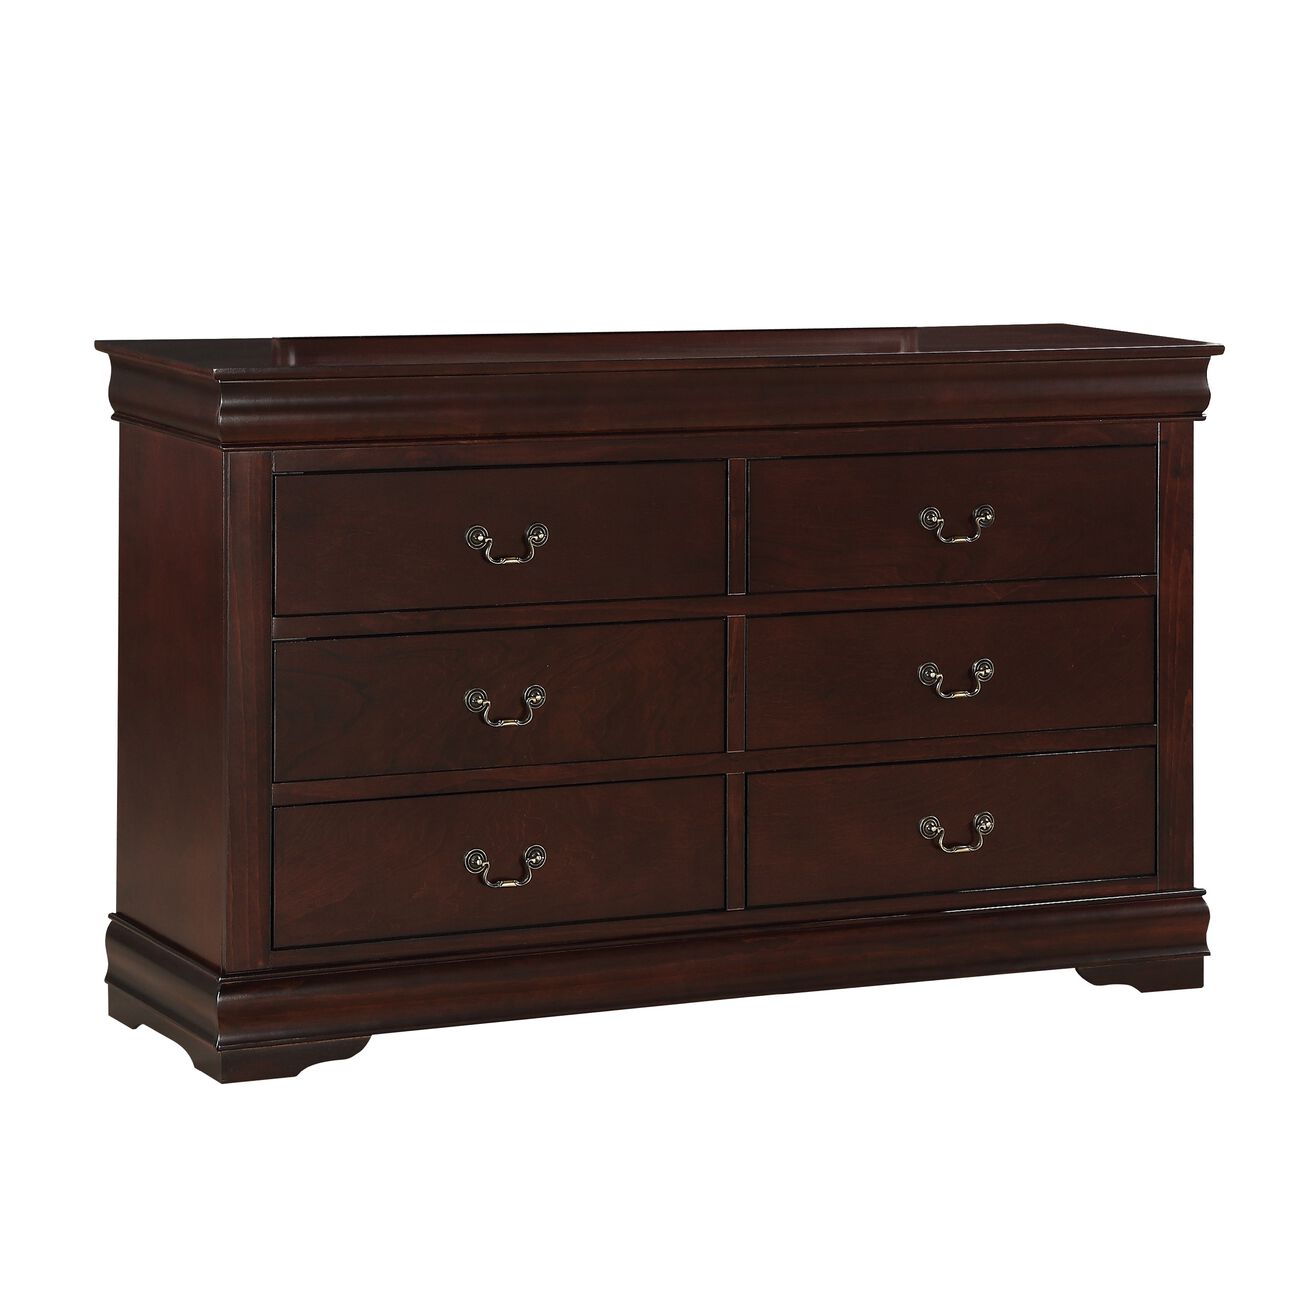 Transitional Style 6 Drawer Dresser with Metal Pulls, Cherry Brown - BM215249